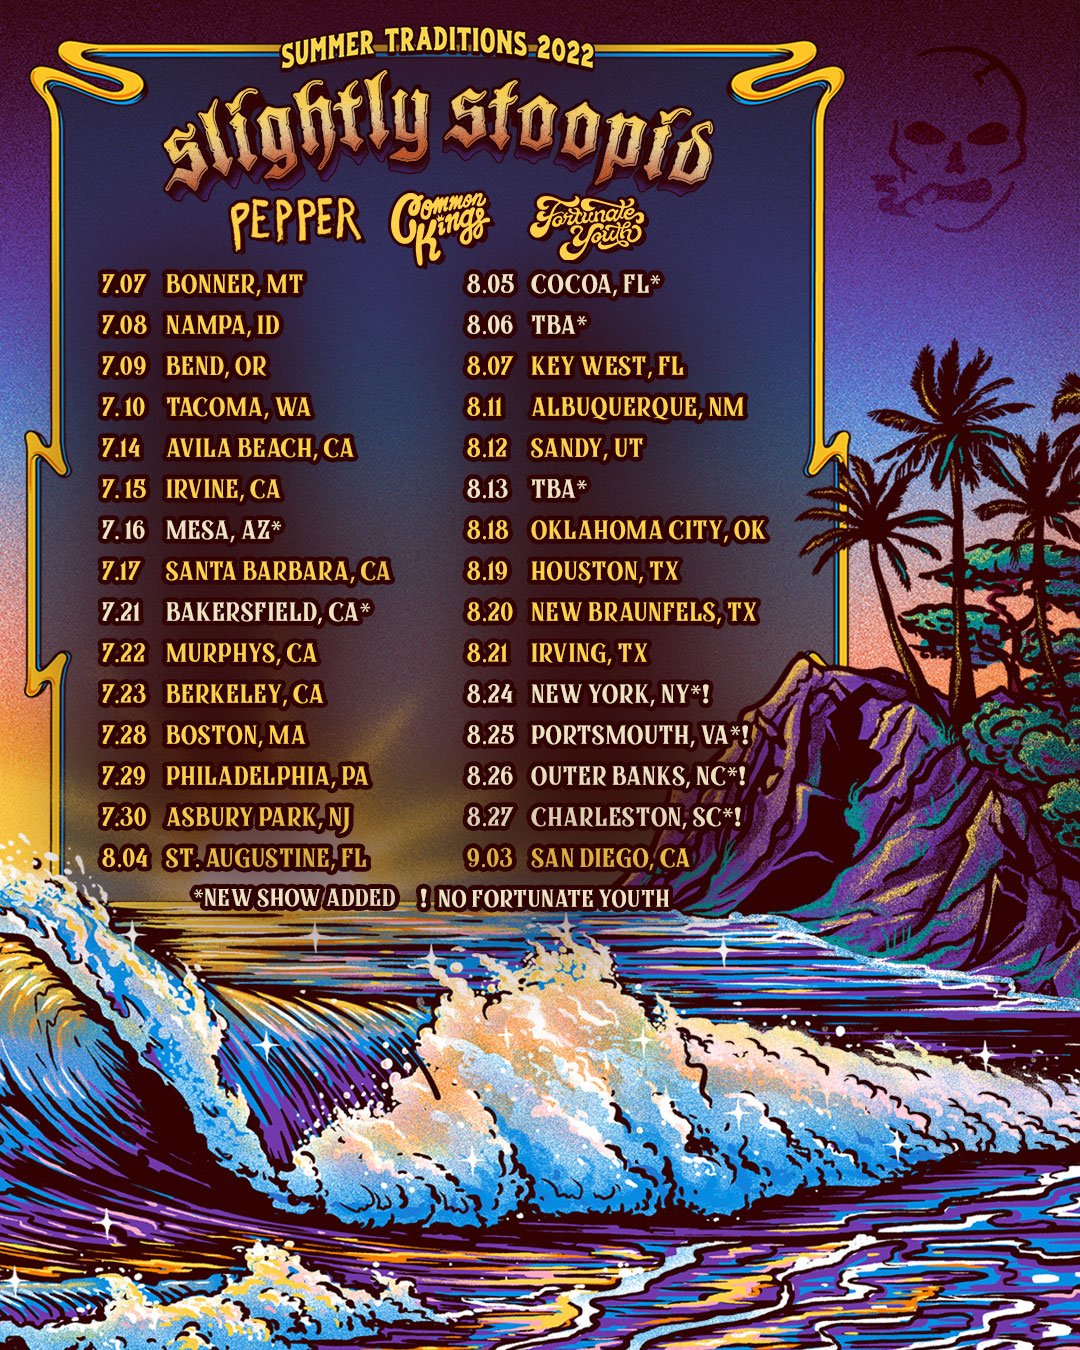 New Summer Traditions 2022 Shows Announced — Slightly Stoopid